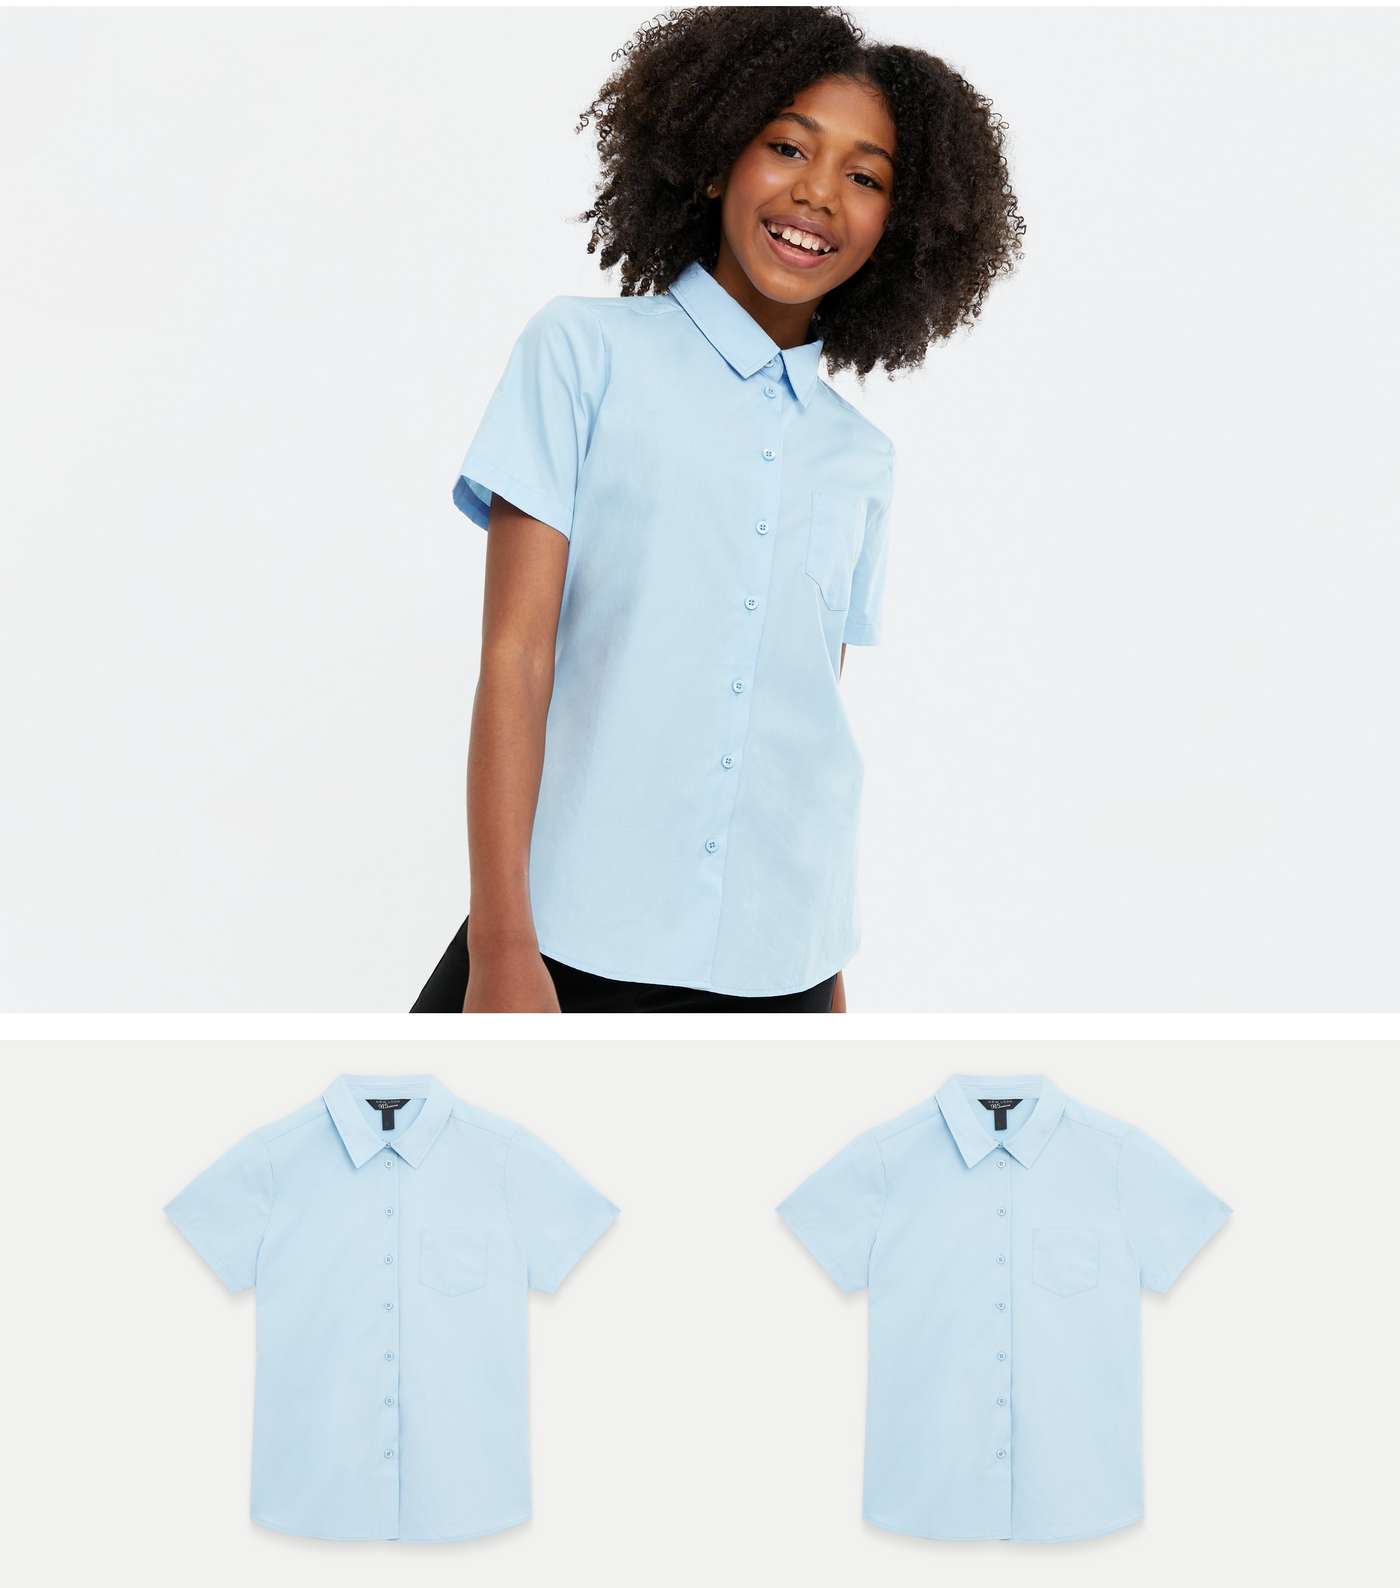 Girls 2 Pack Pale Blue Collared Short Sleeve Shirts